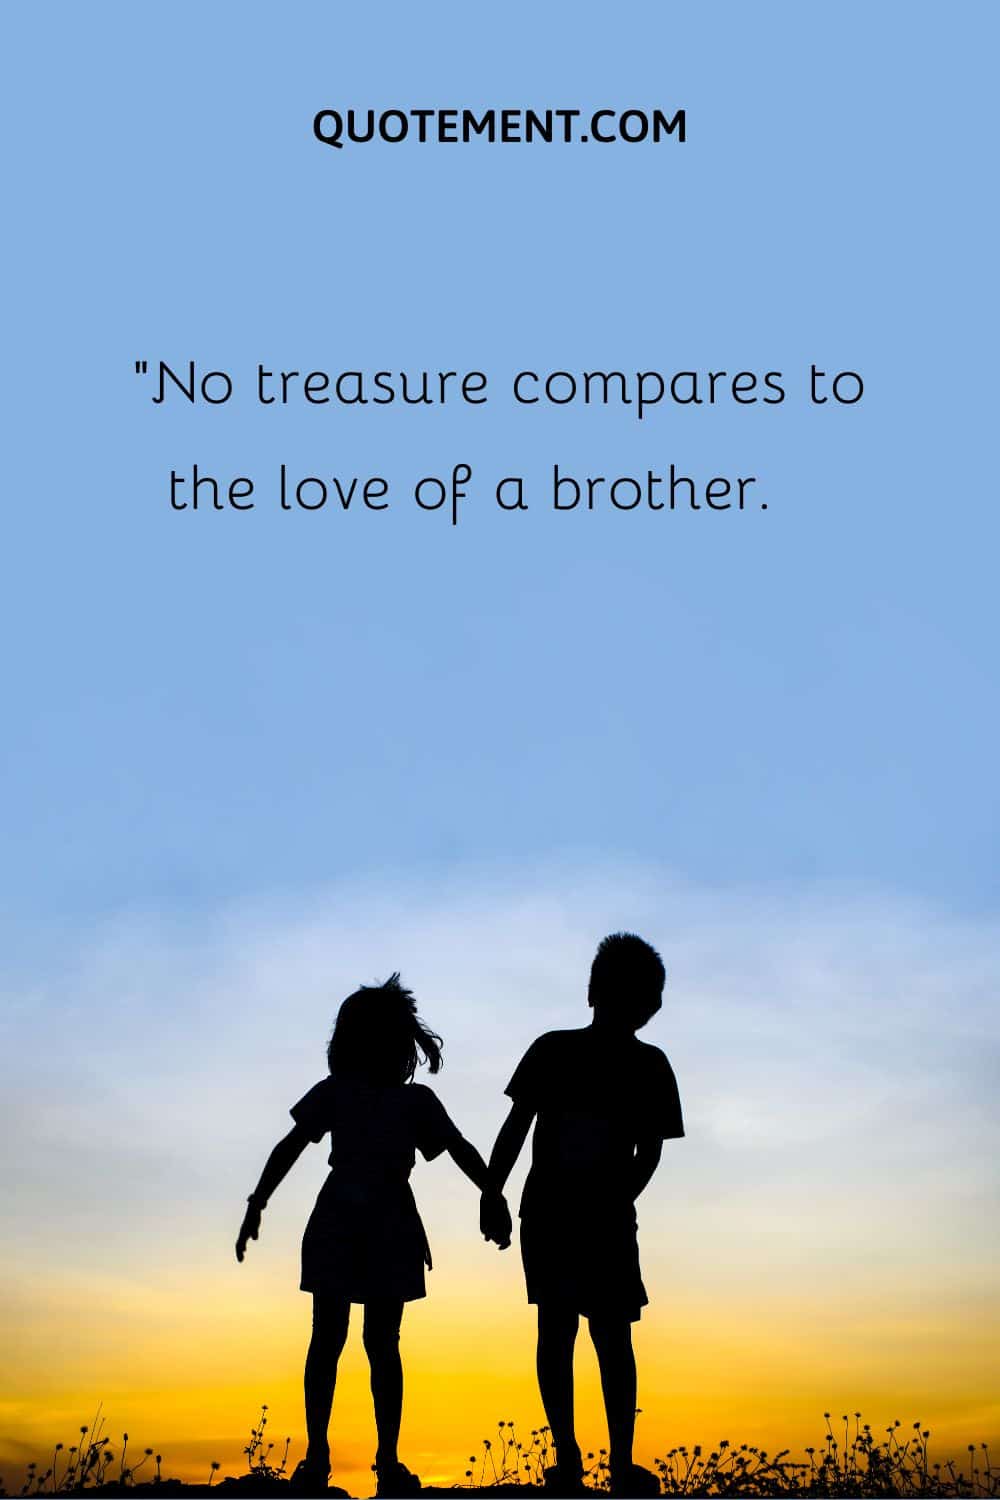 “No treasure compares to the love of a brother.”